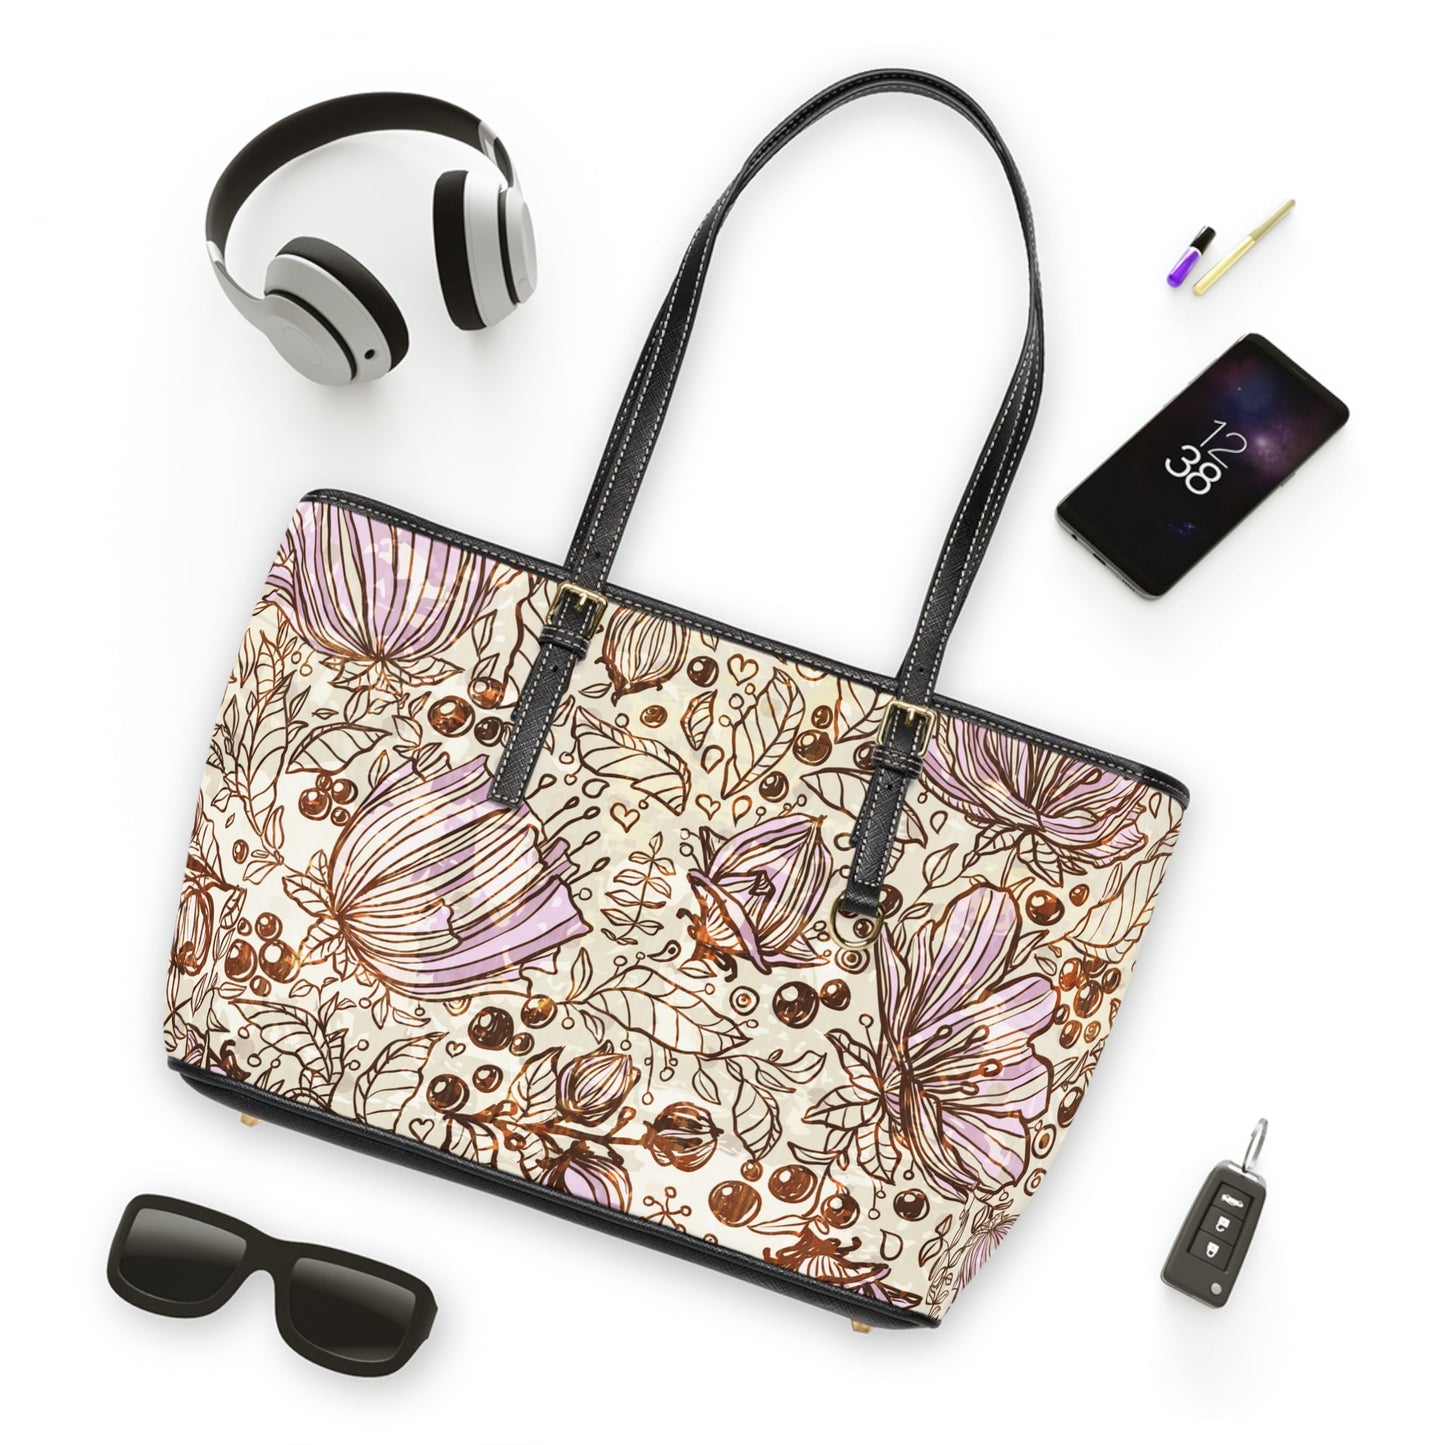 Bags - Very Floral PU Leather Shoulder Bag